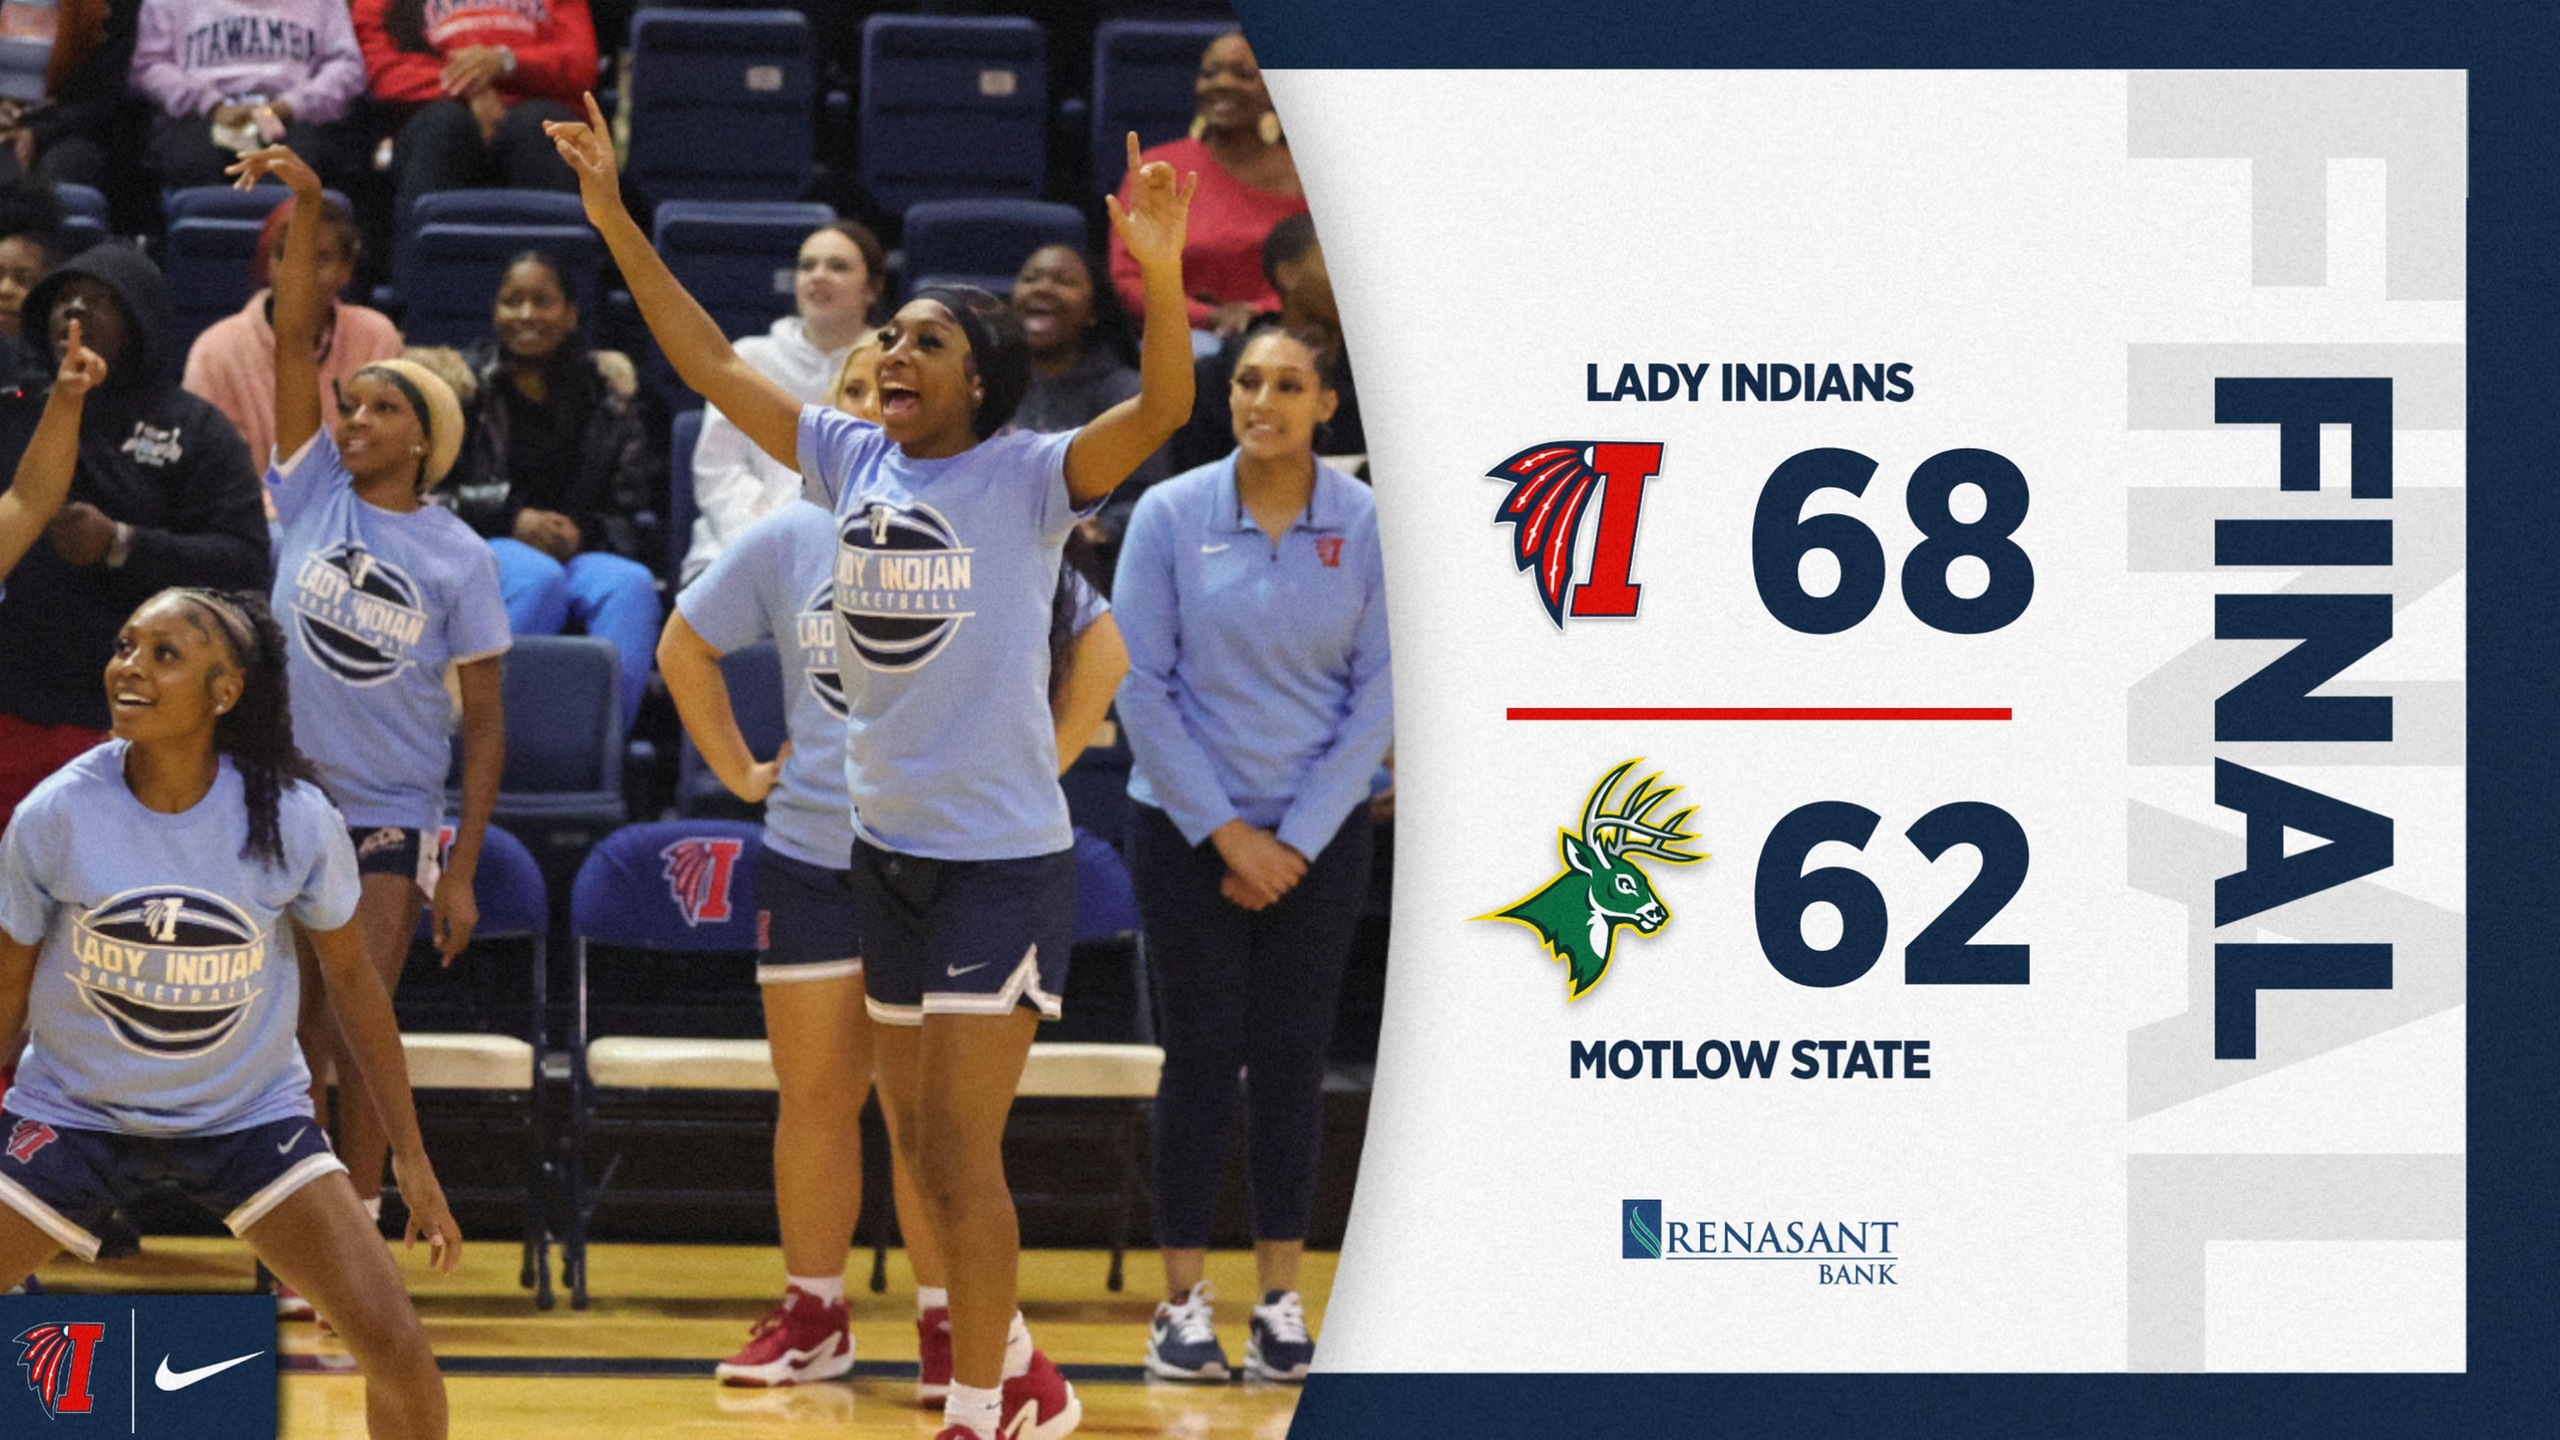 Lady Indians open season with win over Motlow State